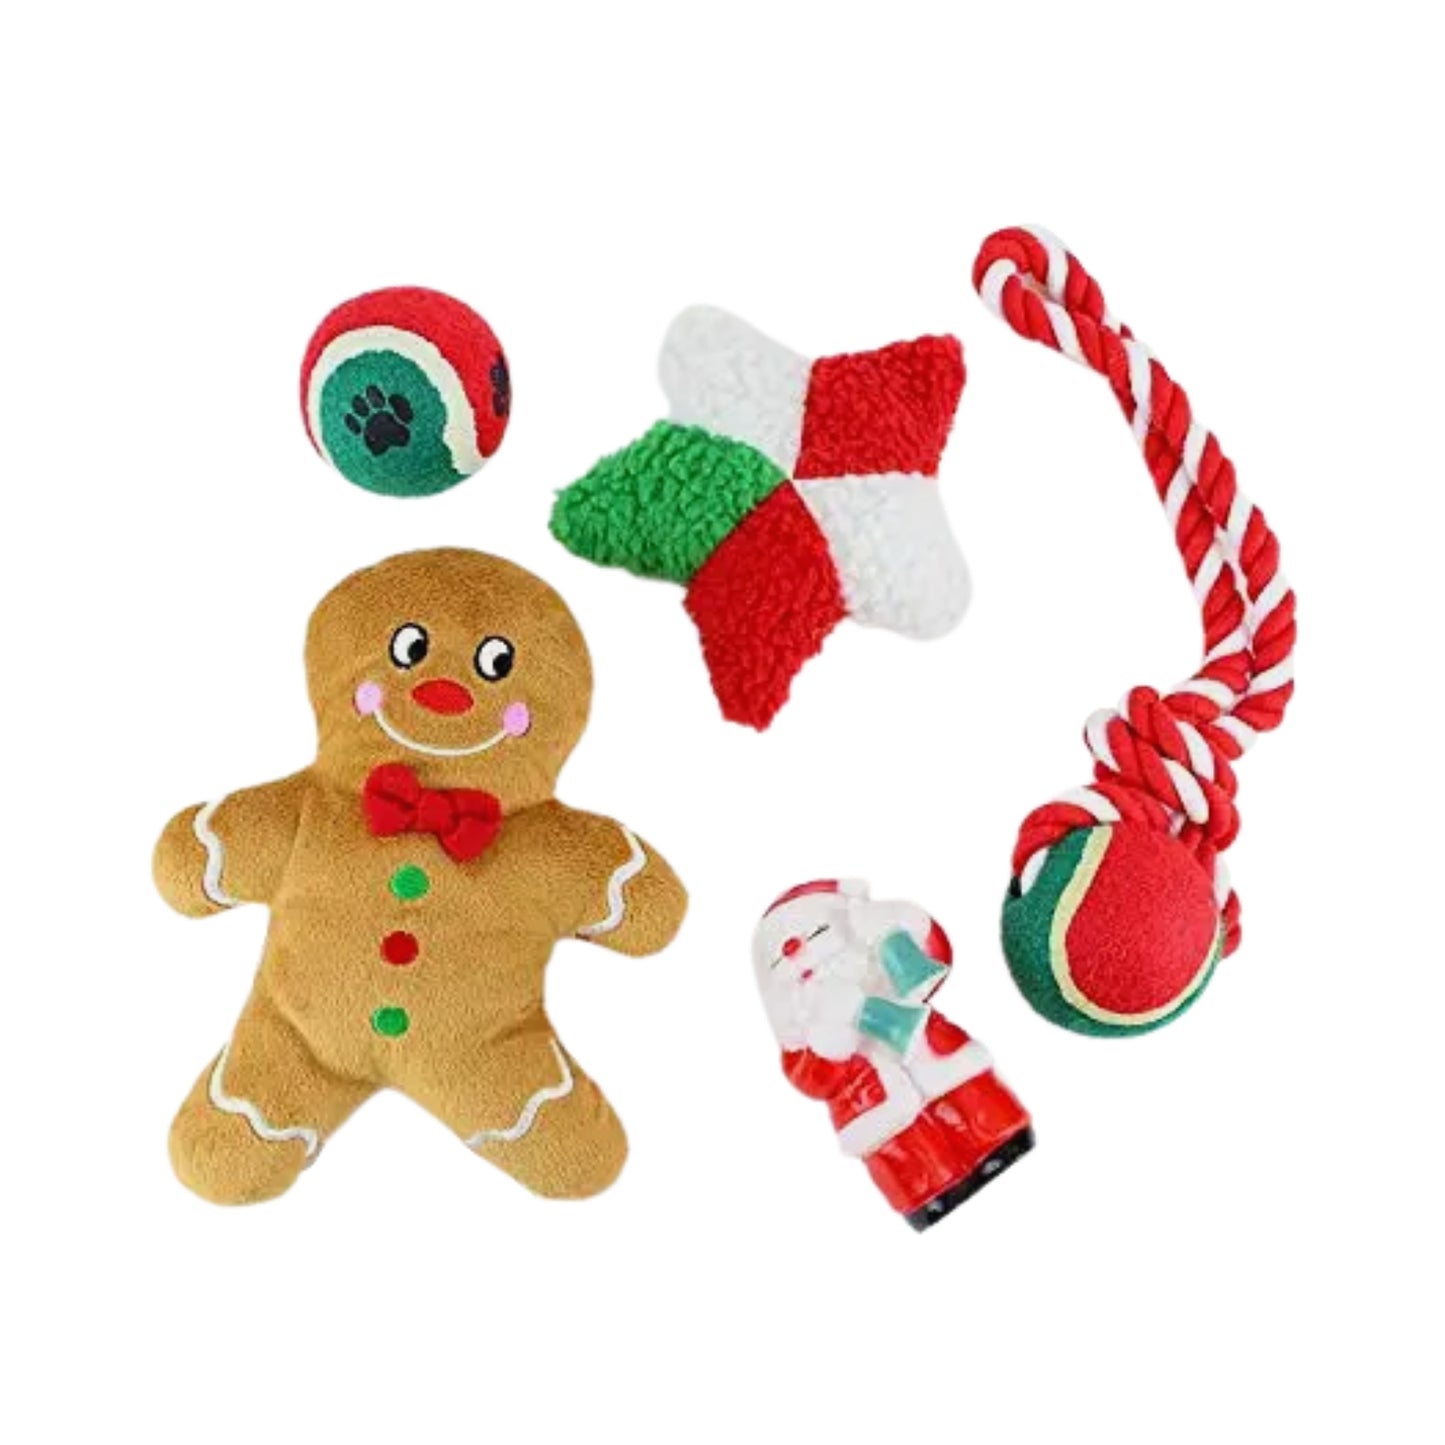 Midlee Toy Filled Christmas Dog Stocking Gift Set (14")- Squeaky Plush Ball Rope Holiday Pet Present